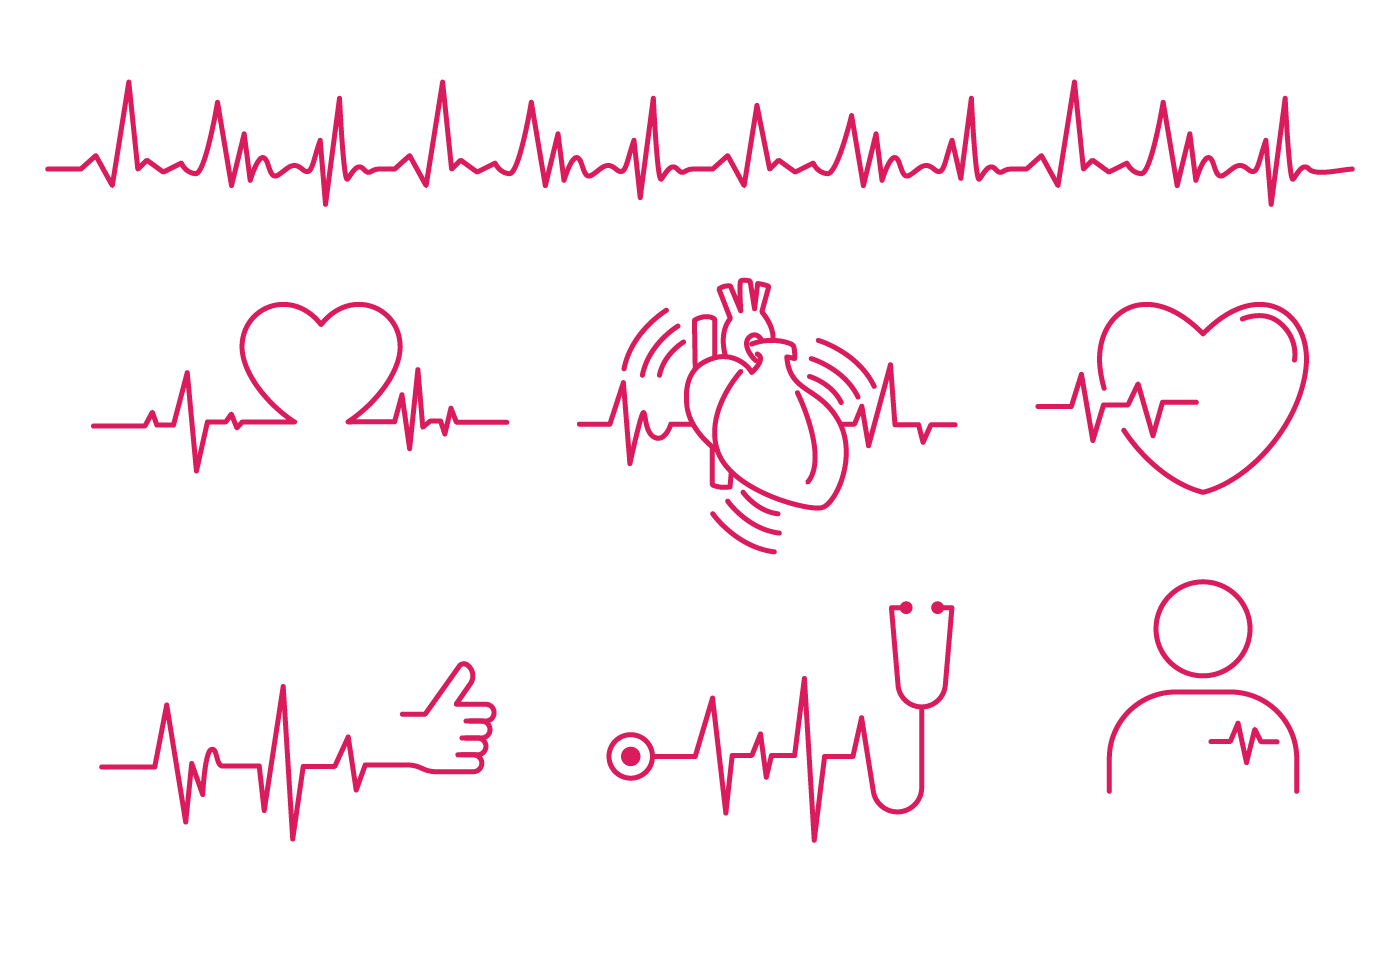 Browse 1,073 incredible Heart Ekg vectors, icons, clipart graphics, and bac...